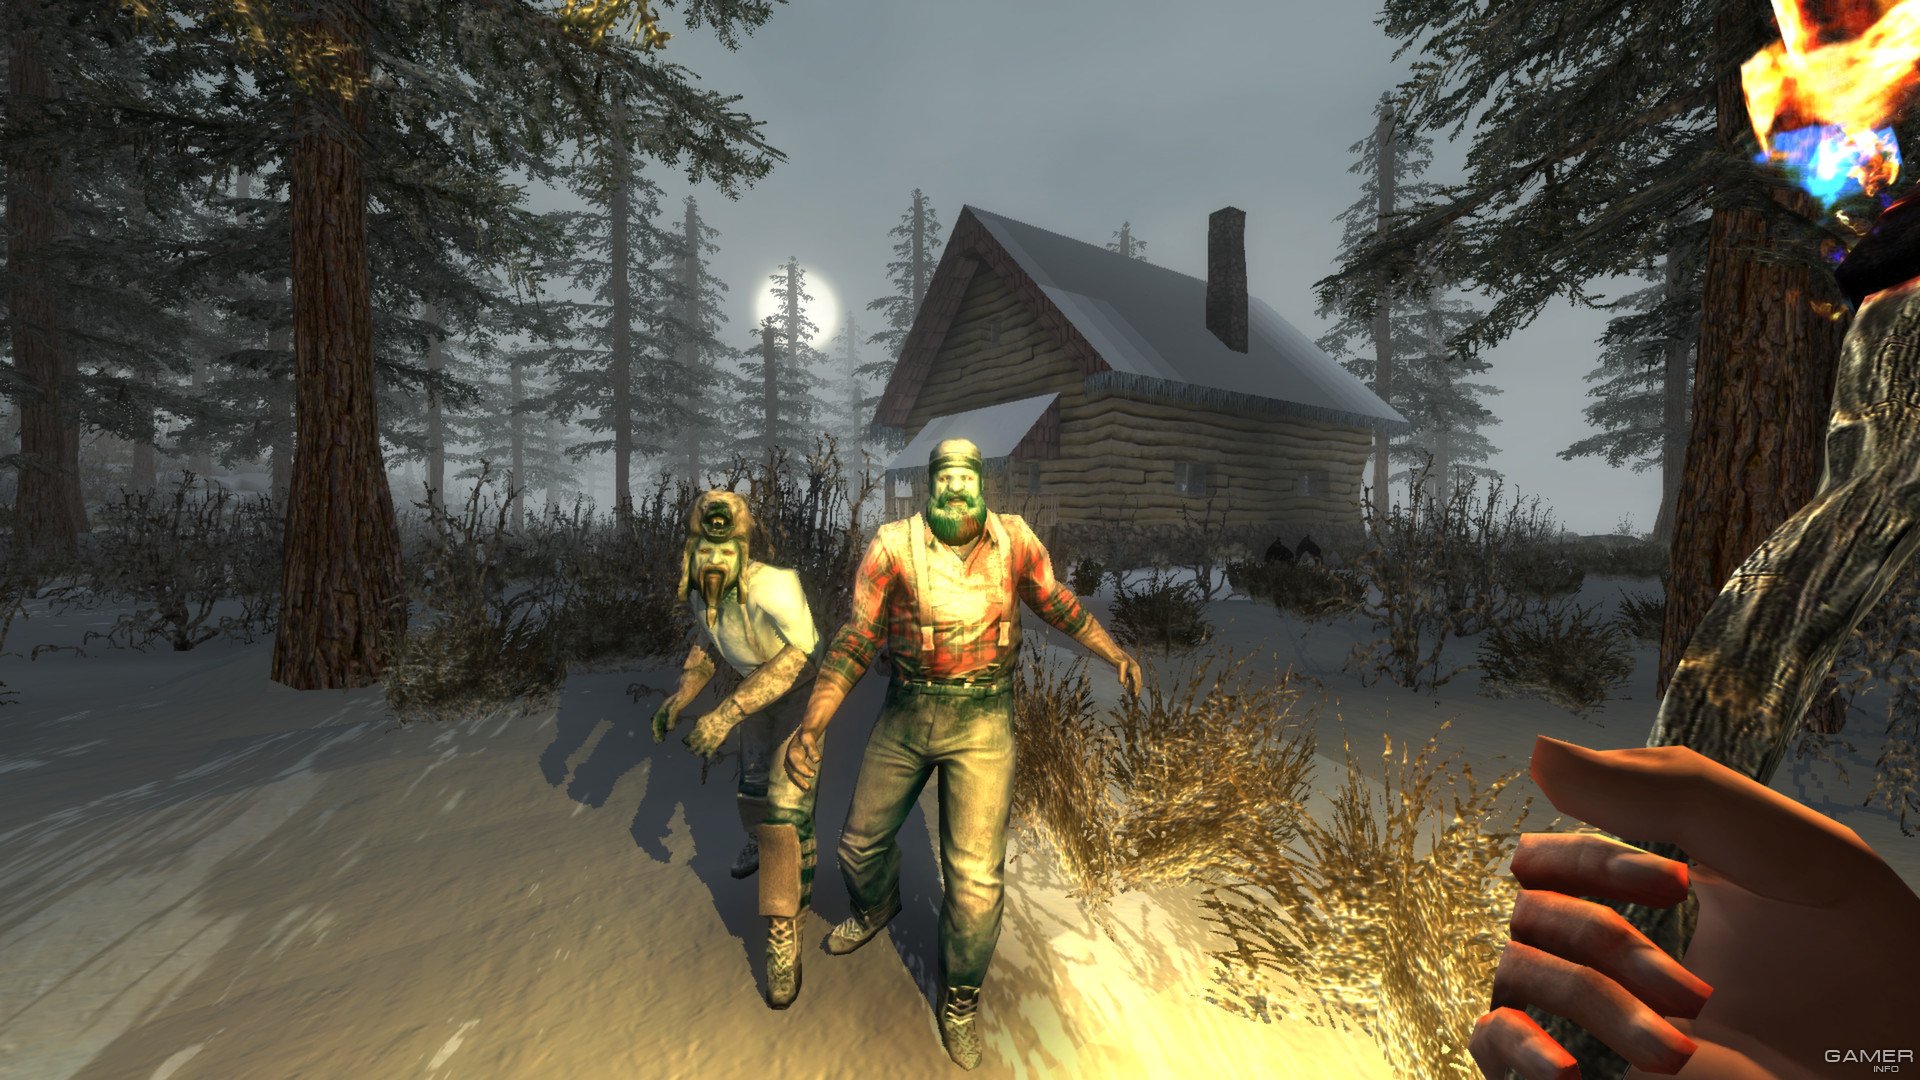 seven days to die pc requirements